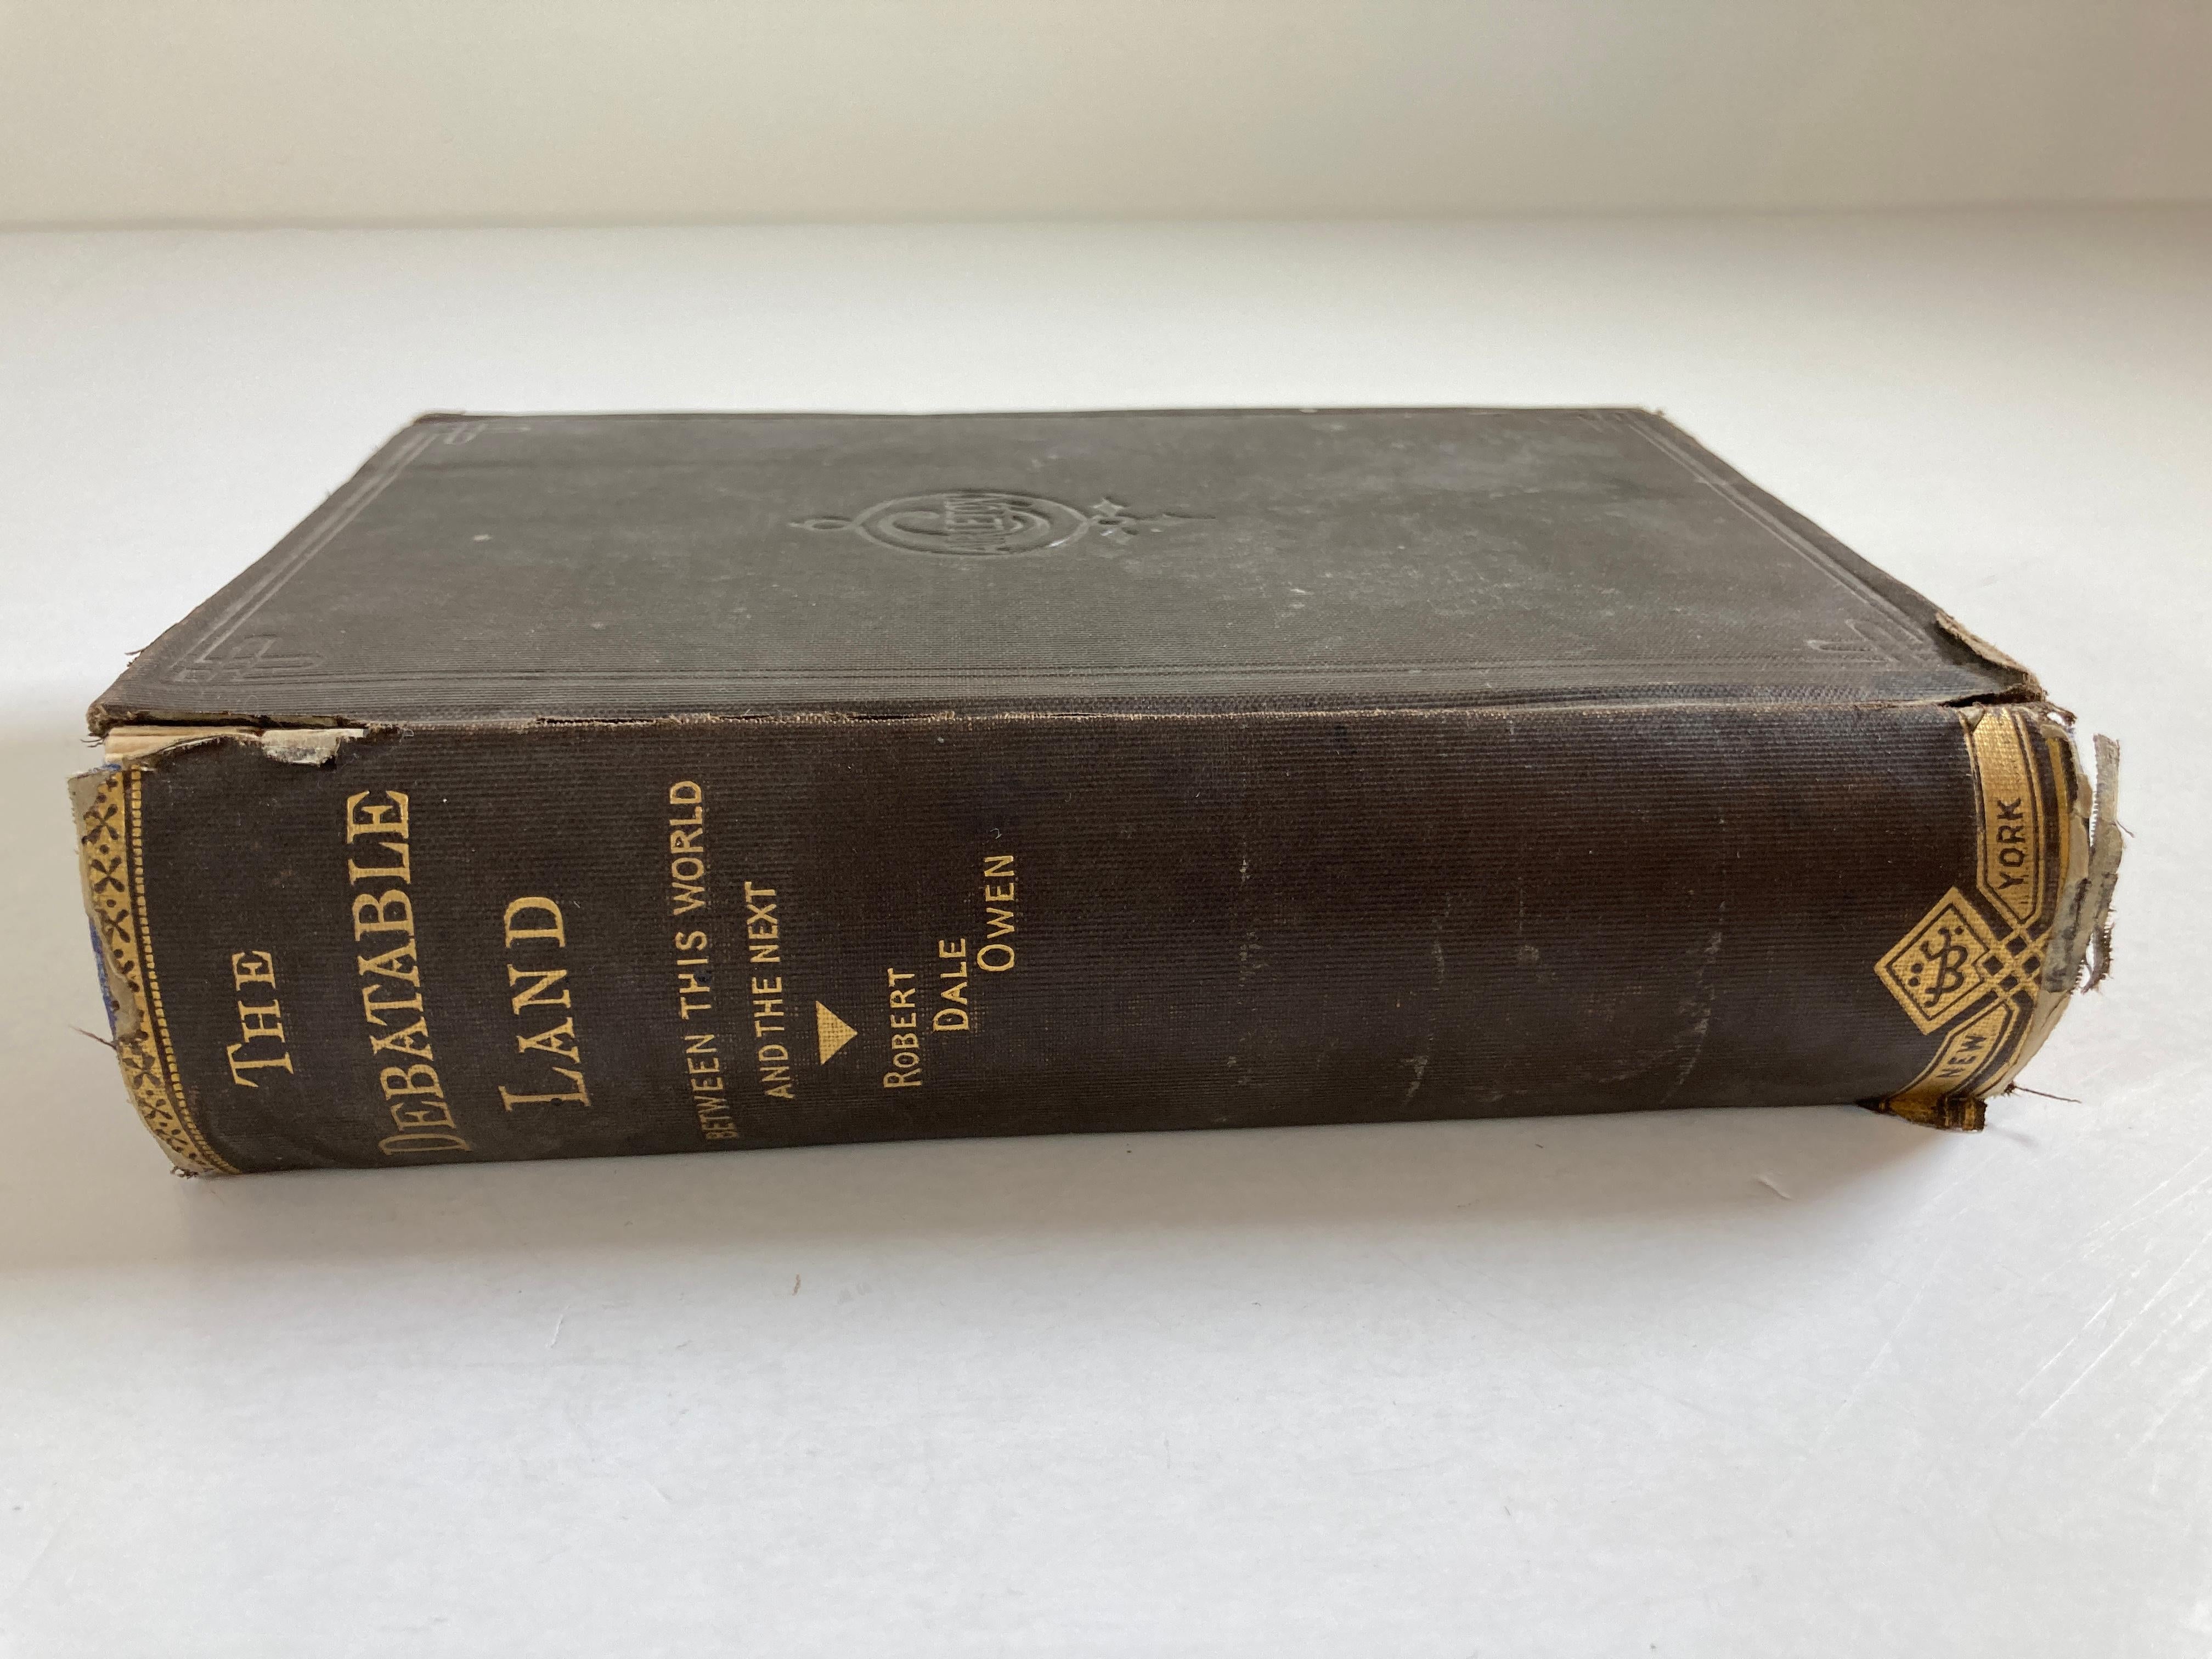 The Debatable Land Between This World and the Next antique book by Robert Dale Owen.
Early original edition book, dating back to the 1880s, are now extremely scarce and increasingly expensive.
Dated 1880.
Author: Robert Dale Owen
This is a